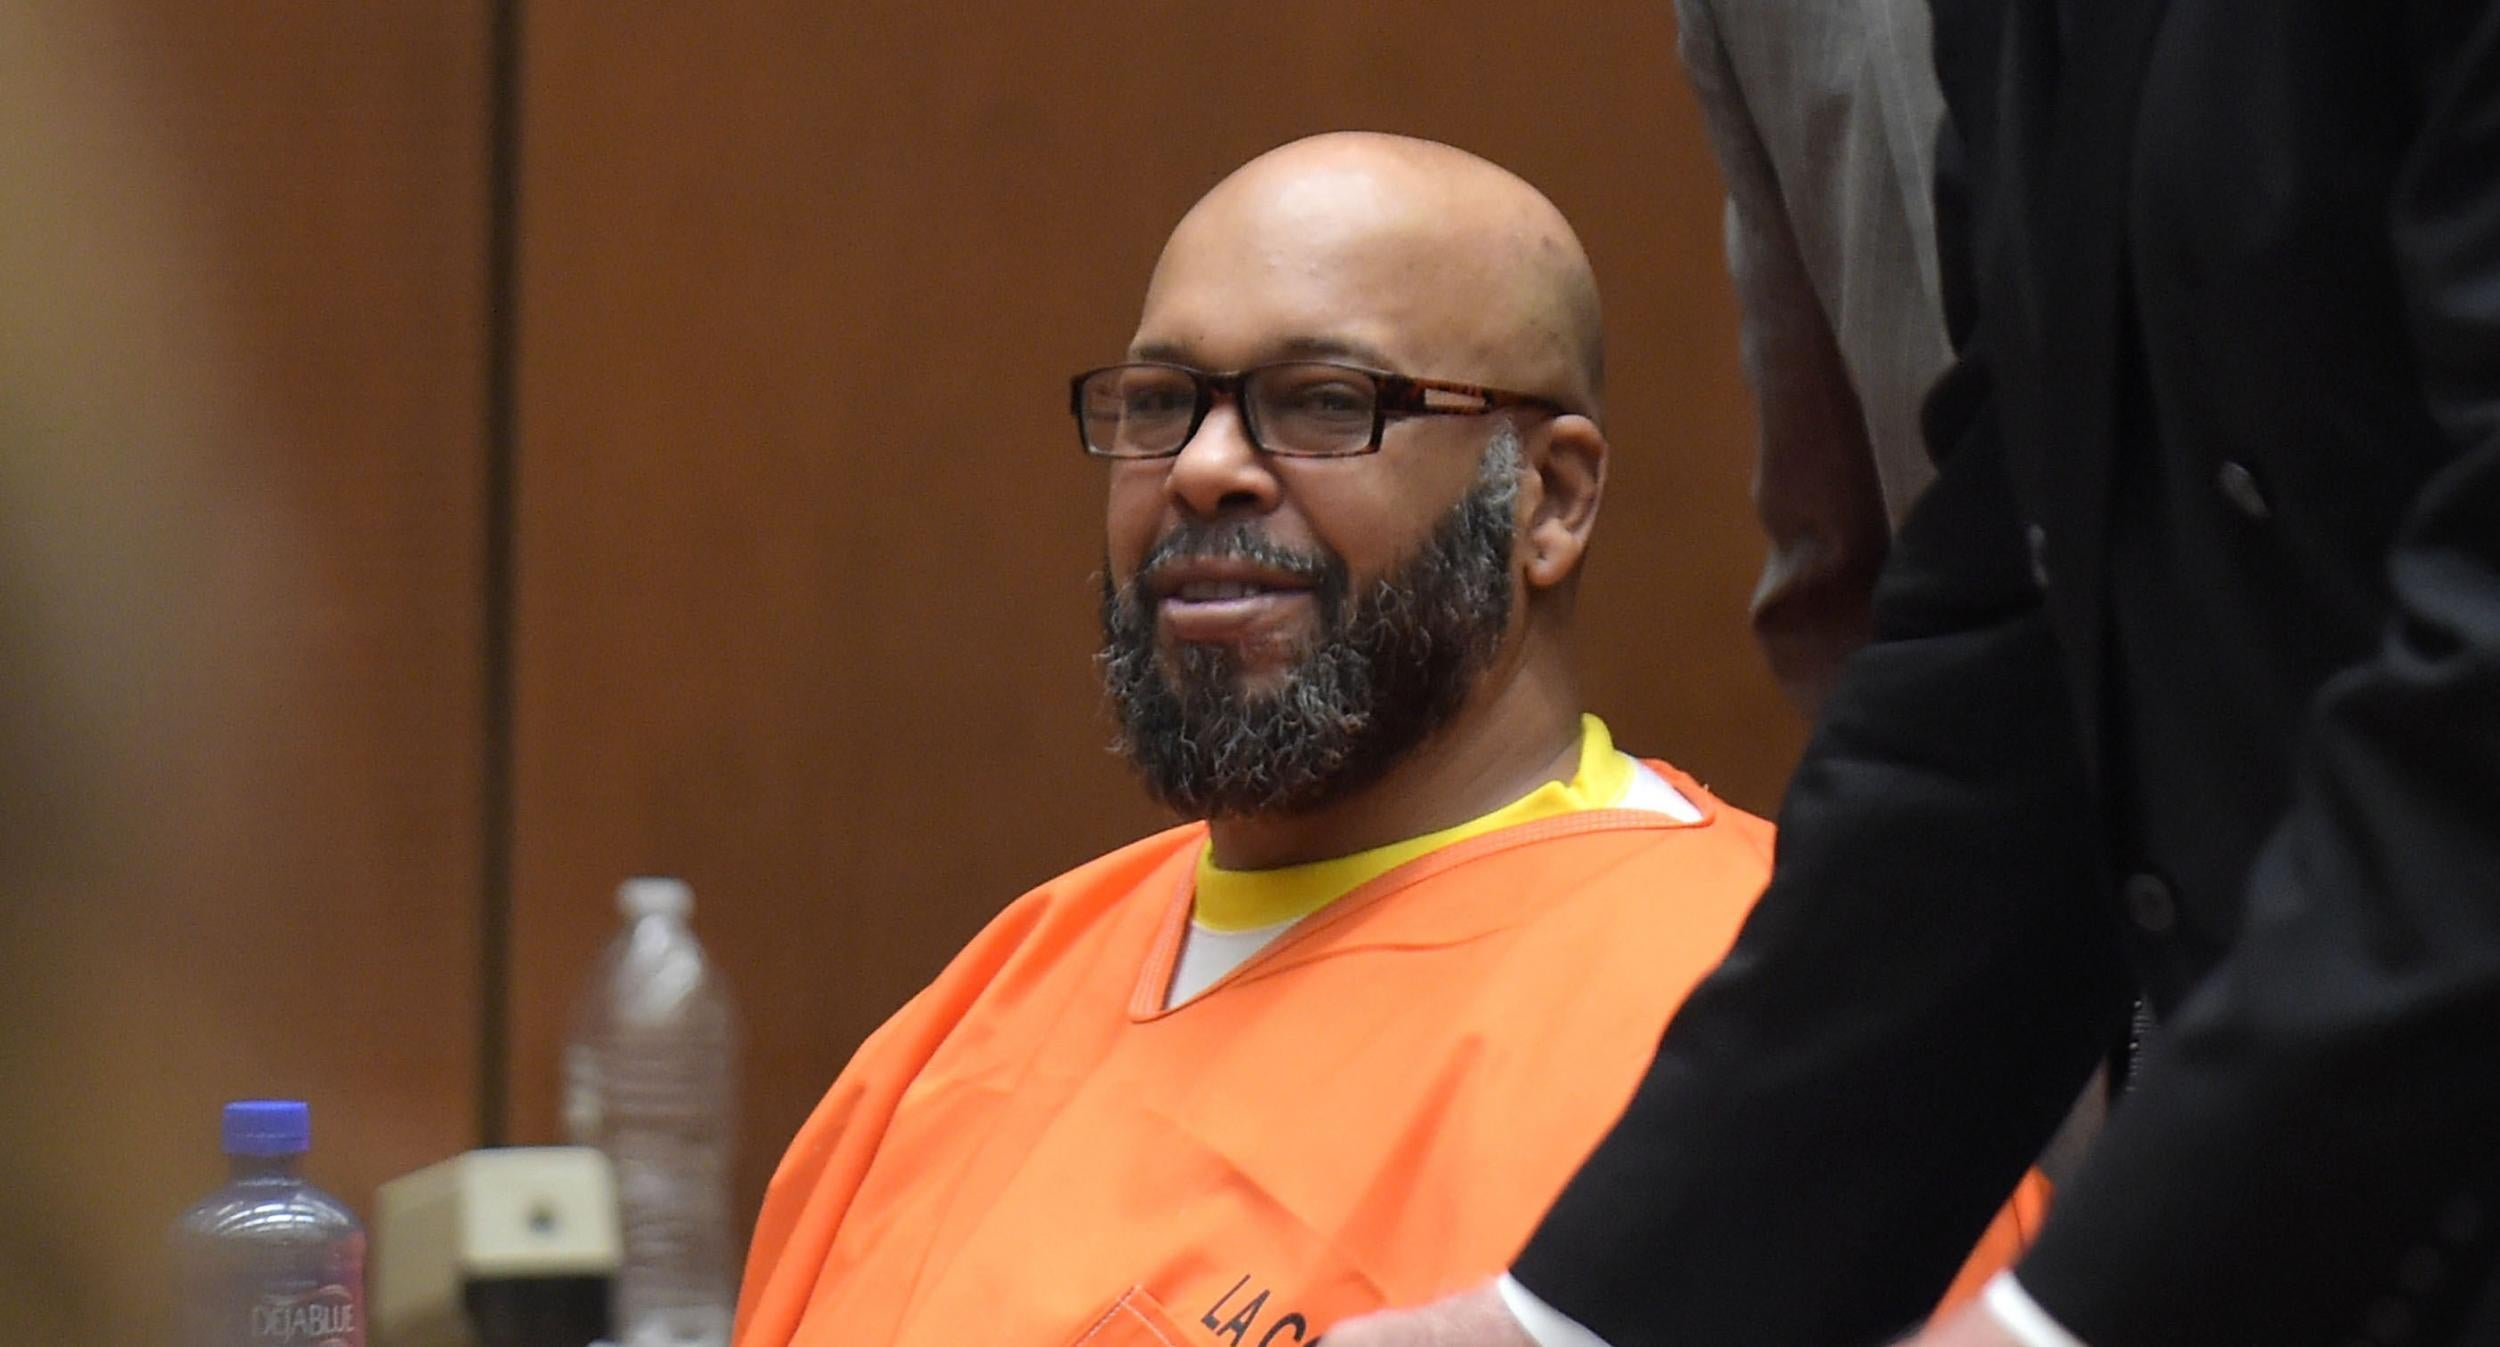 Marion "Suge" Knight makes a court appearance in a motion to dismiss murder charges at Criminal Courts Building on May 29, 2015 in Los Angeles, California.